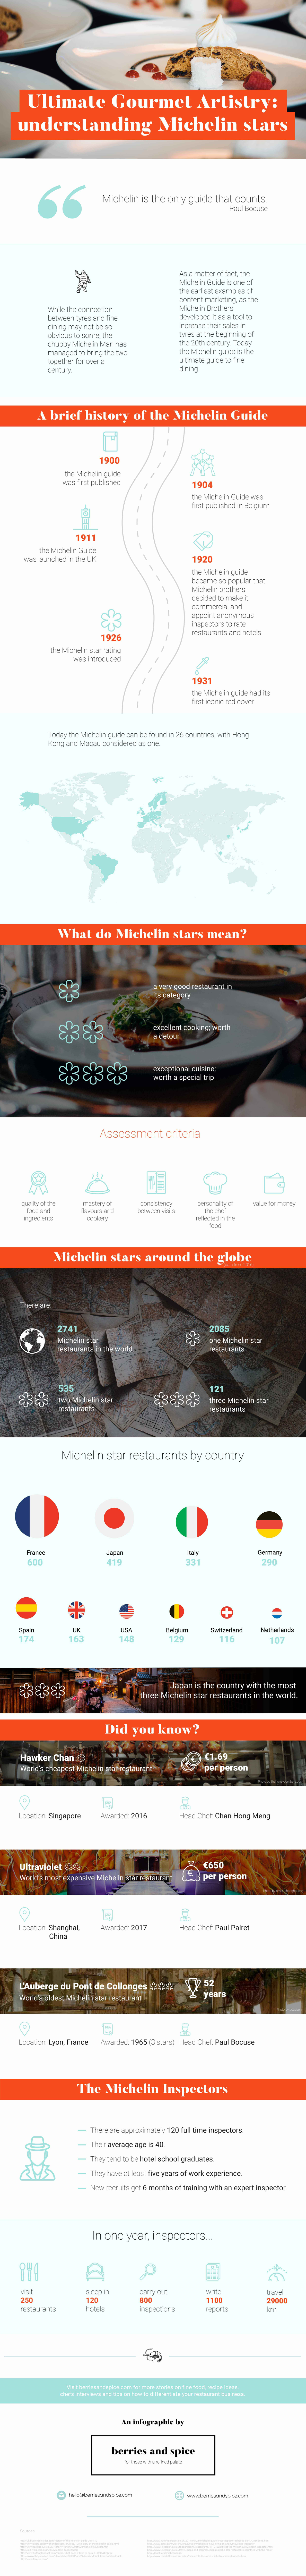 Ultimate gourmet artistry: understanding Michelin stars [infographic] | Berries and Spice